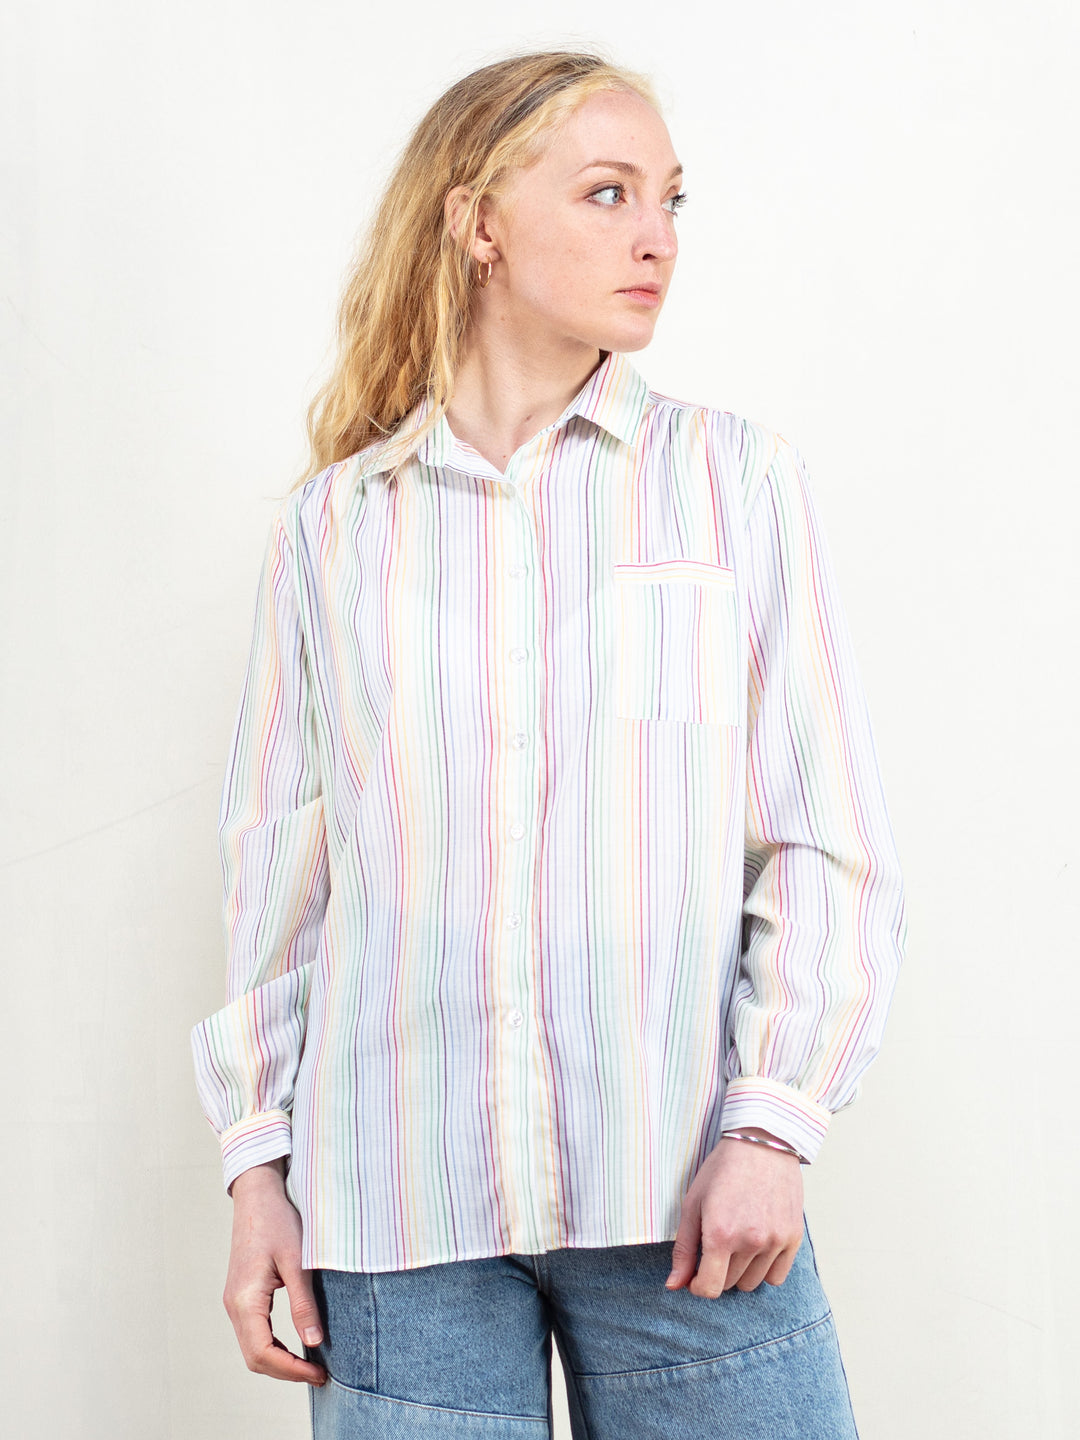 Striped Women Shirt casual vintage 90s shirt collared rainbow stripes summer light shirt white formal shirt patterned blouse size large